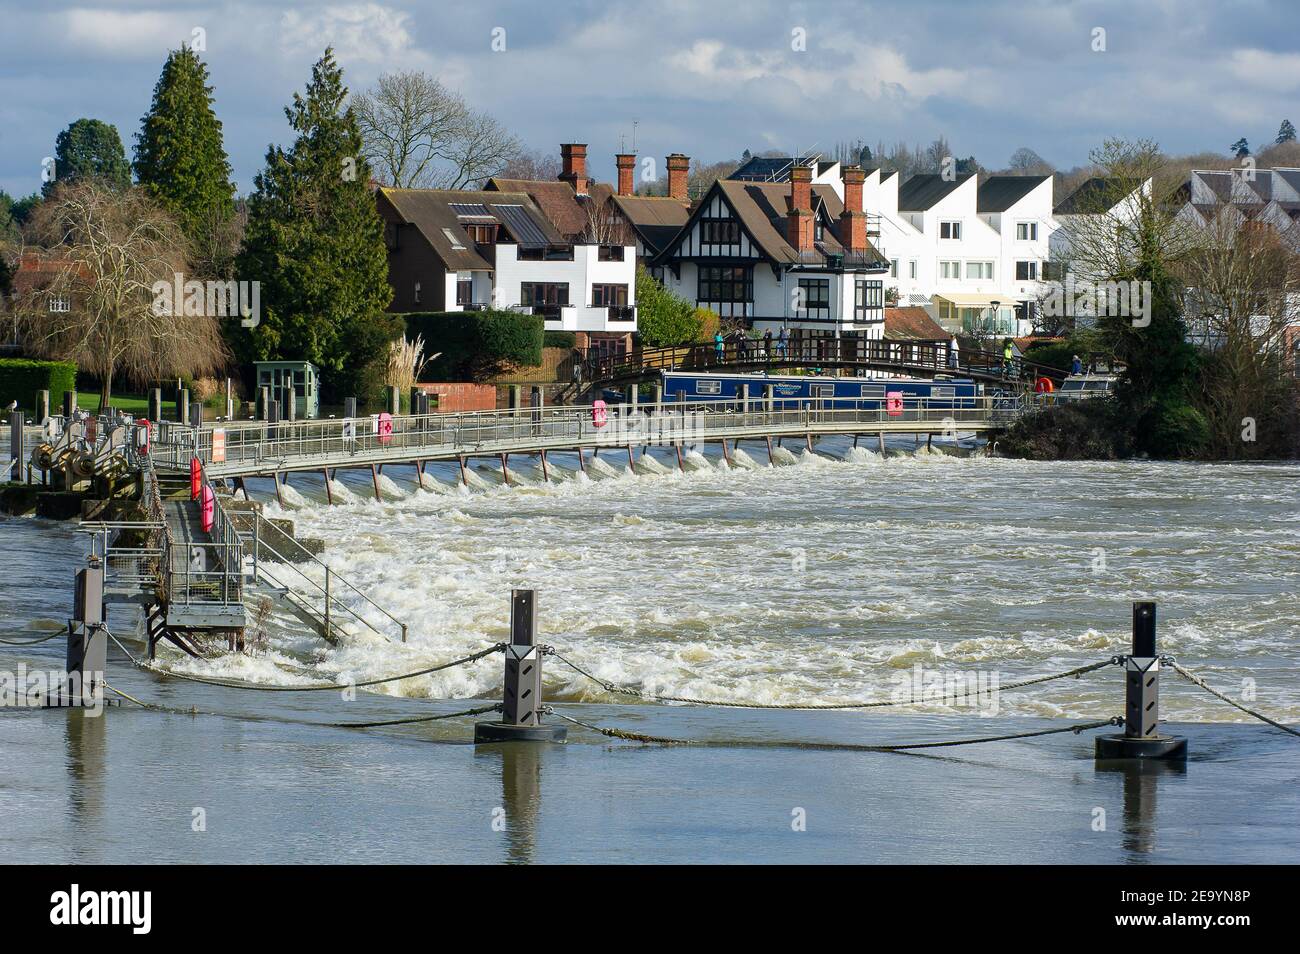 Marlow, Buckinghamshire, UK. 6th February, 2021. A strong current in the water at Marlow Lock. A Flood Warning is in place for the River Thames at Marlow following a period of sustained recent rainfall. Residents living near to the River Thames are advised to activate their flood protection products. Property flooding is expected. River levels remain high and the Thames Path is flooded. The Environment Agency are expecting river levels to rise again this weekend due to the forecast rain and possible snow. Credit: Maureen McLean/Alamy Stock Photo